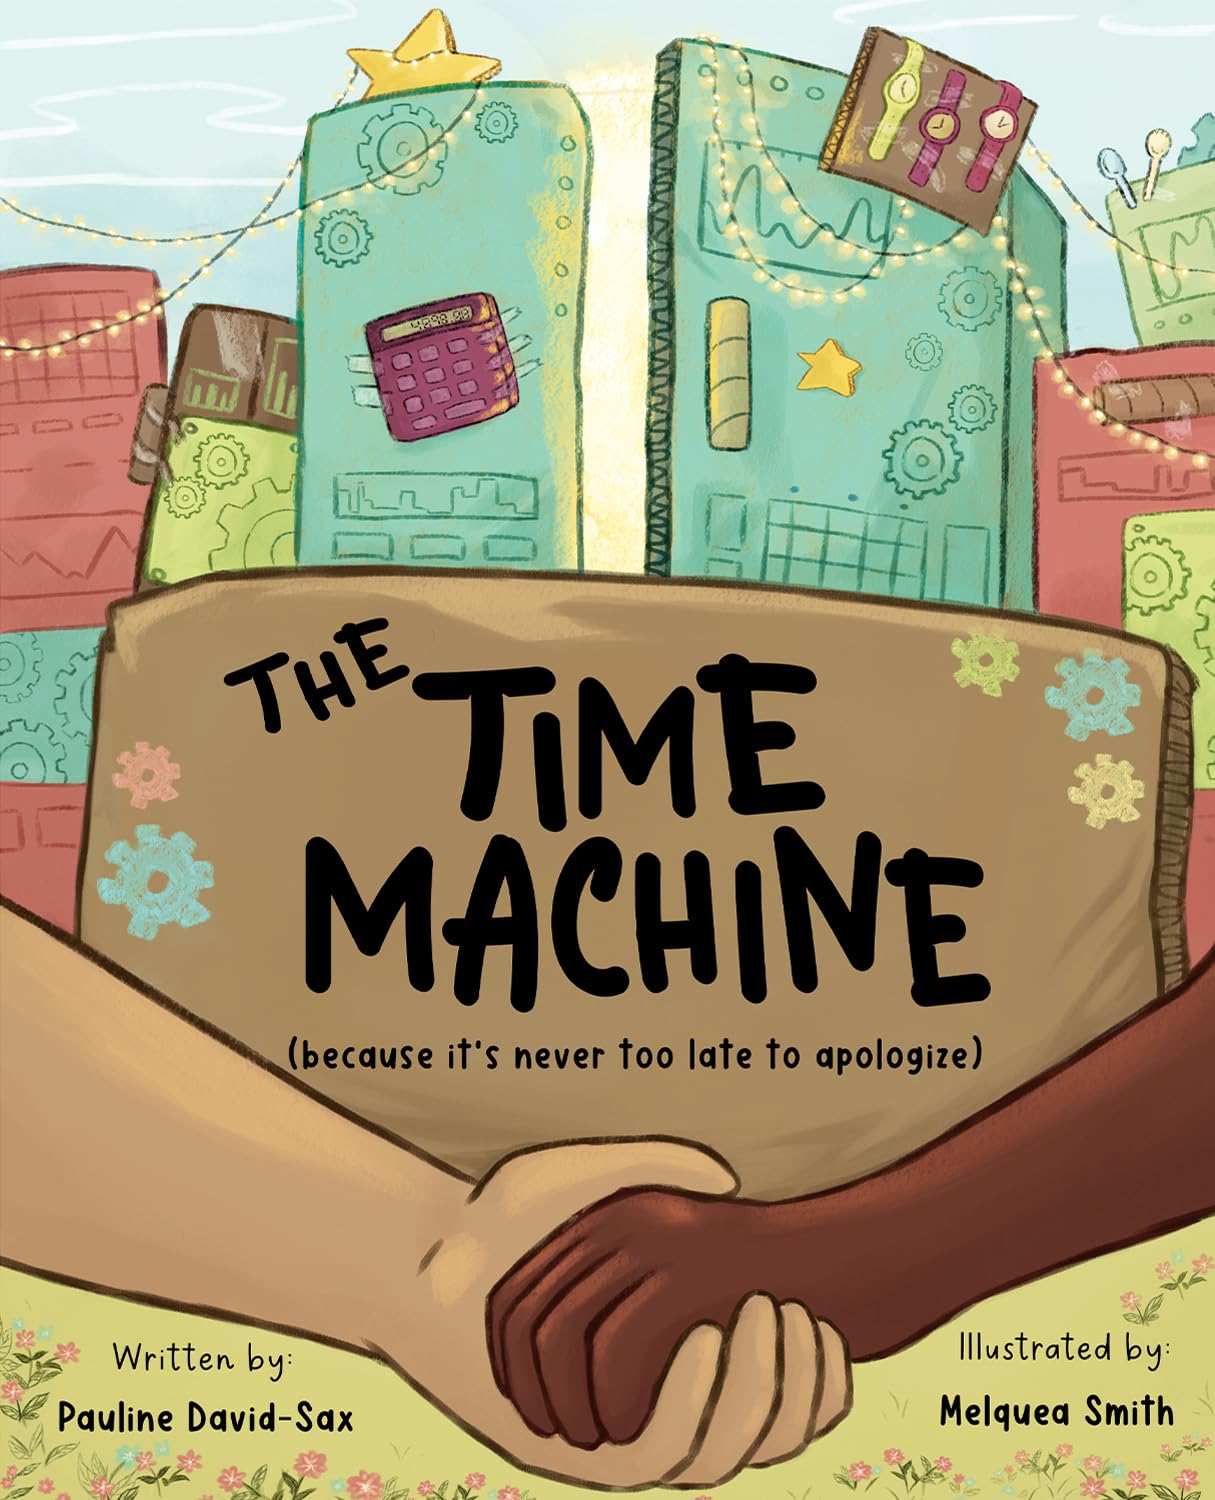 Children's Book Review: The Time Machine by Pauline David-Sax